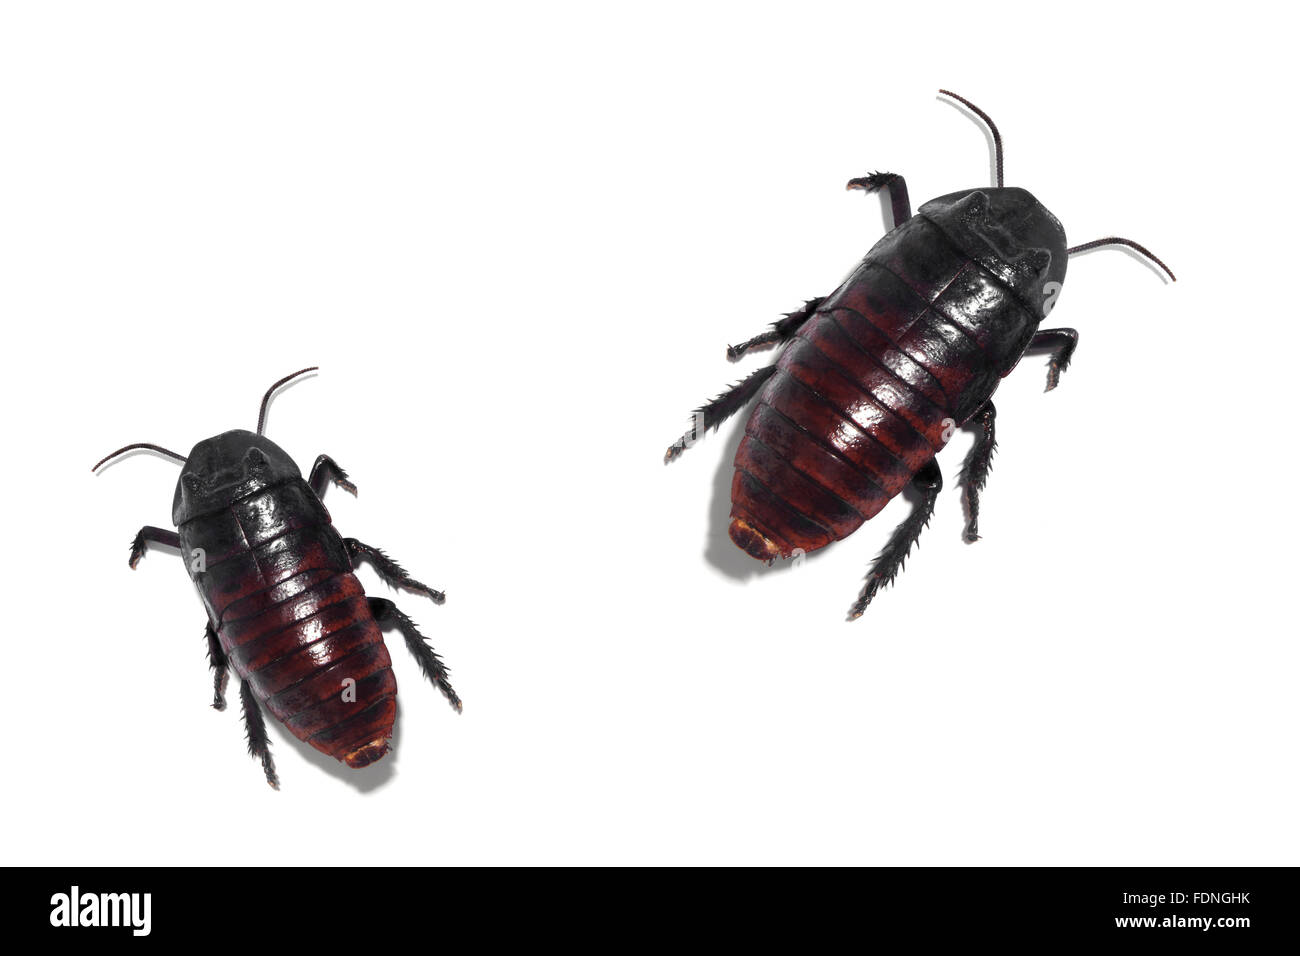 Studio shot of a madagascar Hissing Cockroaches Stock Photo